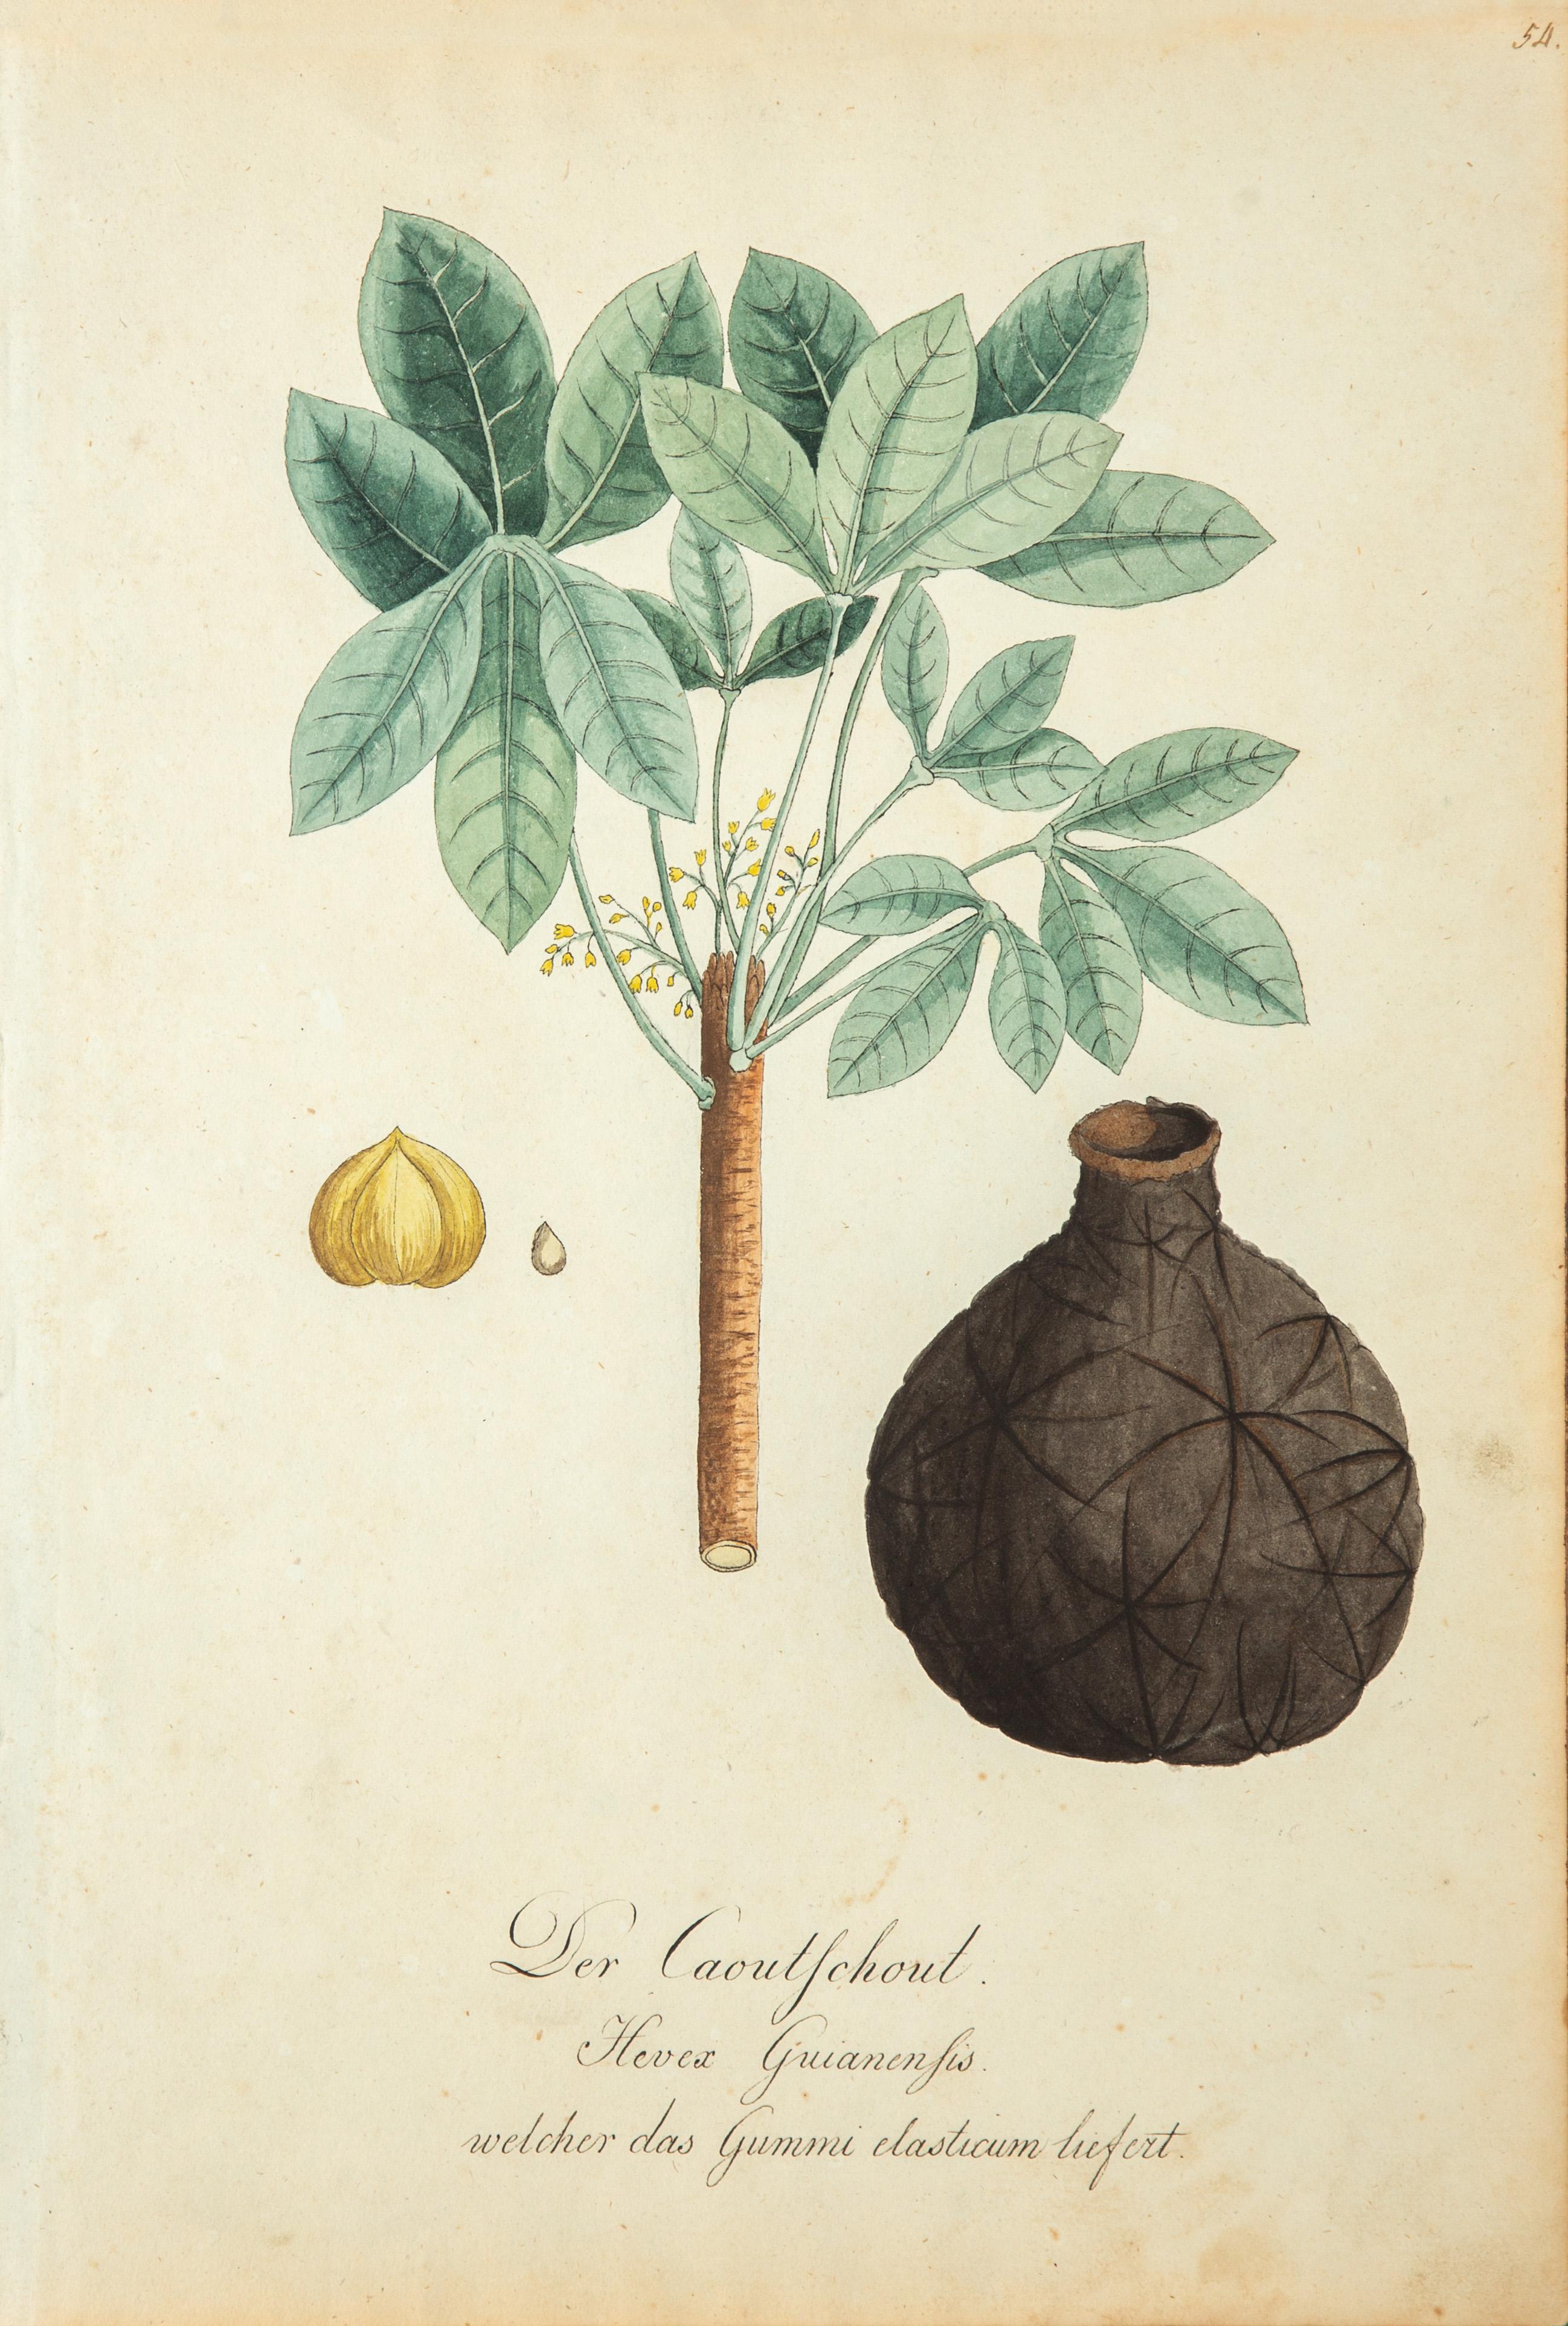 Paper Watercolor of Palms from 1813, German